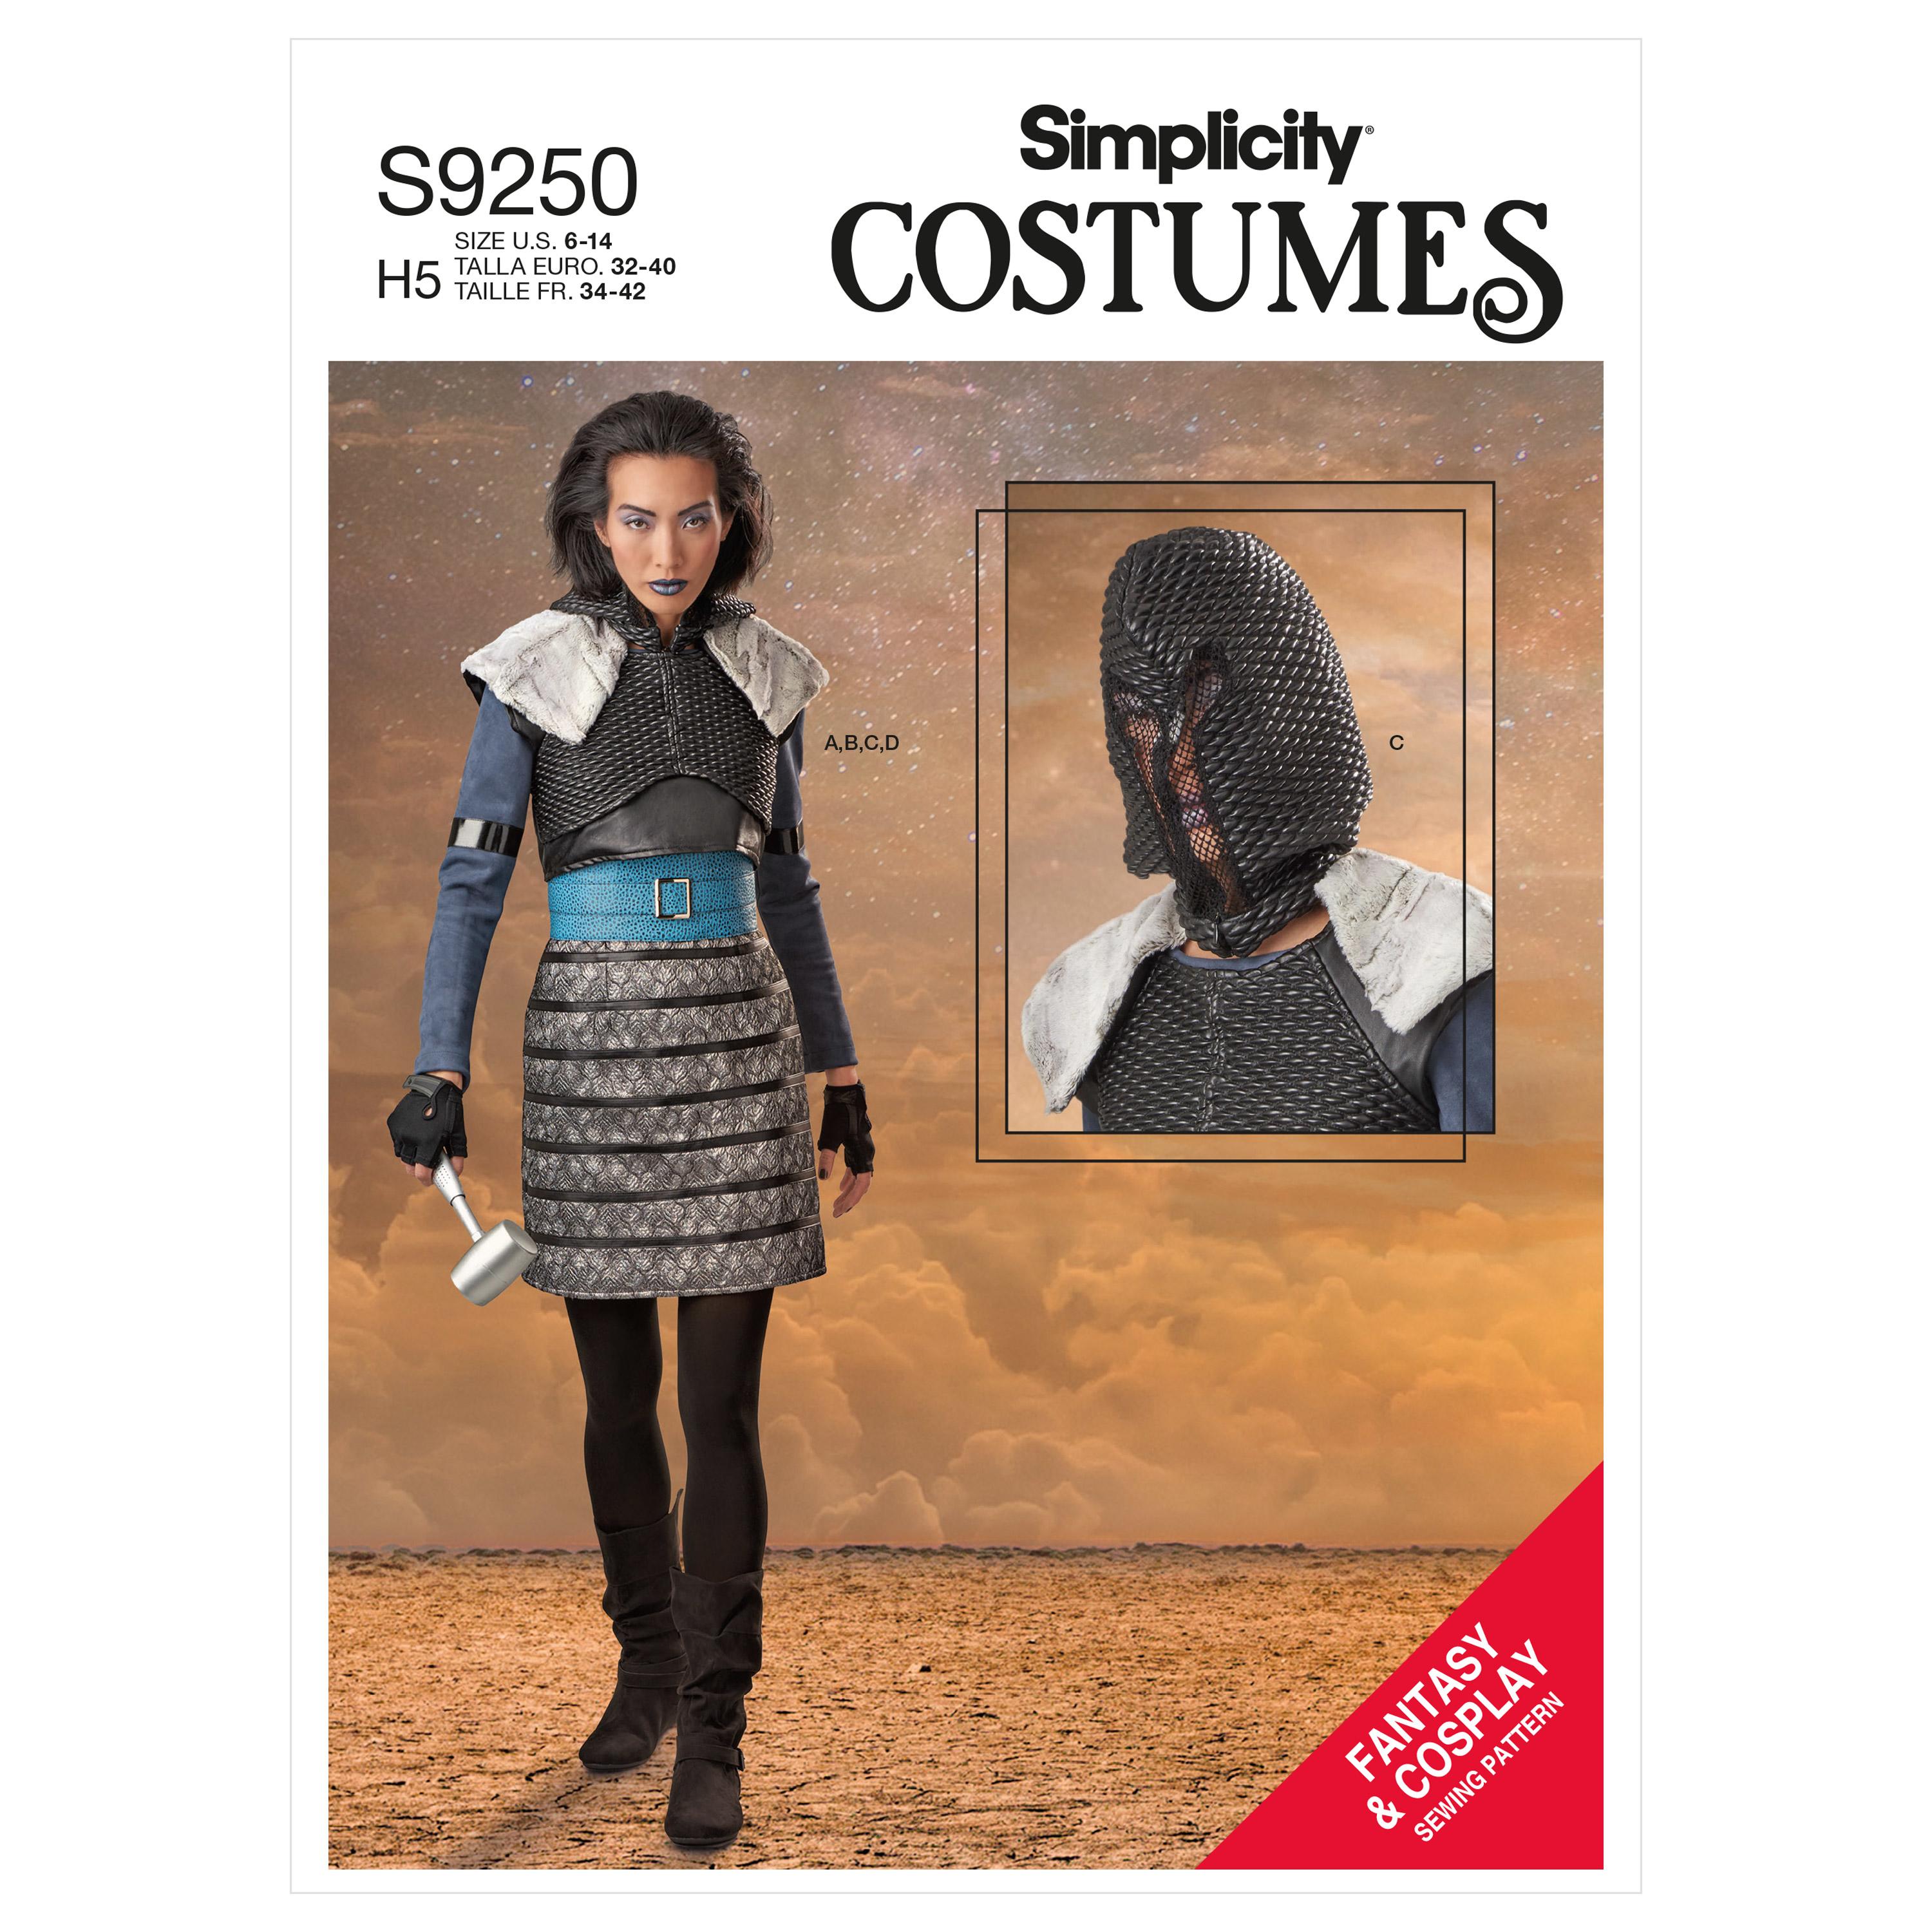 Simplicity Sewing Pattern S9250 Misses' Costume